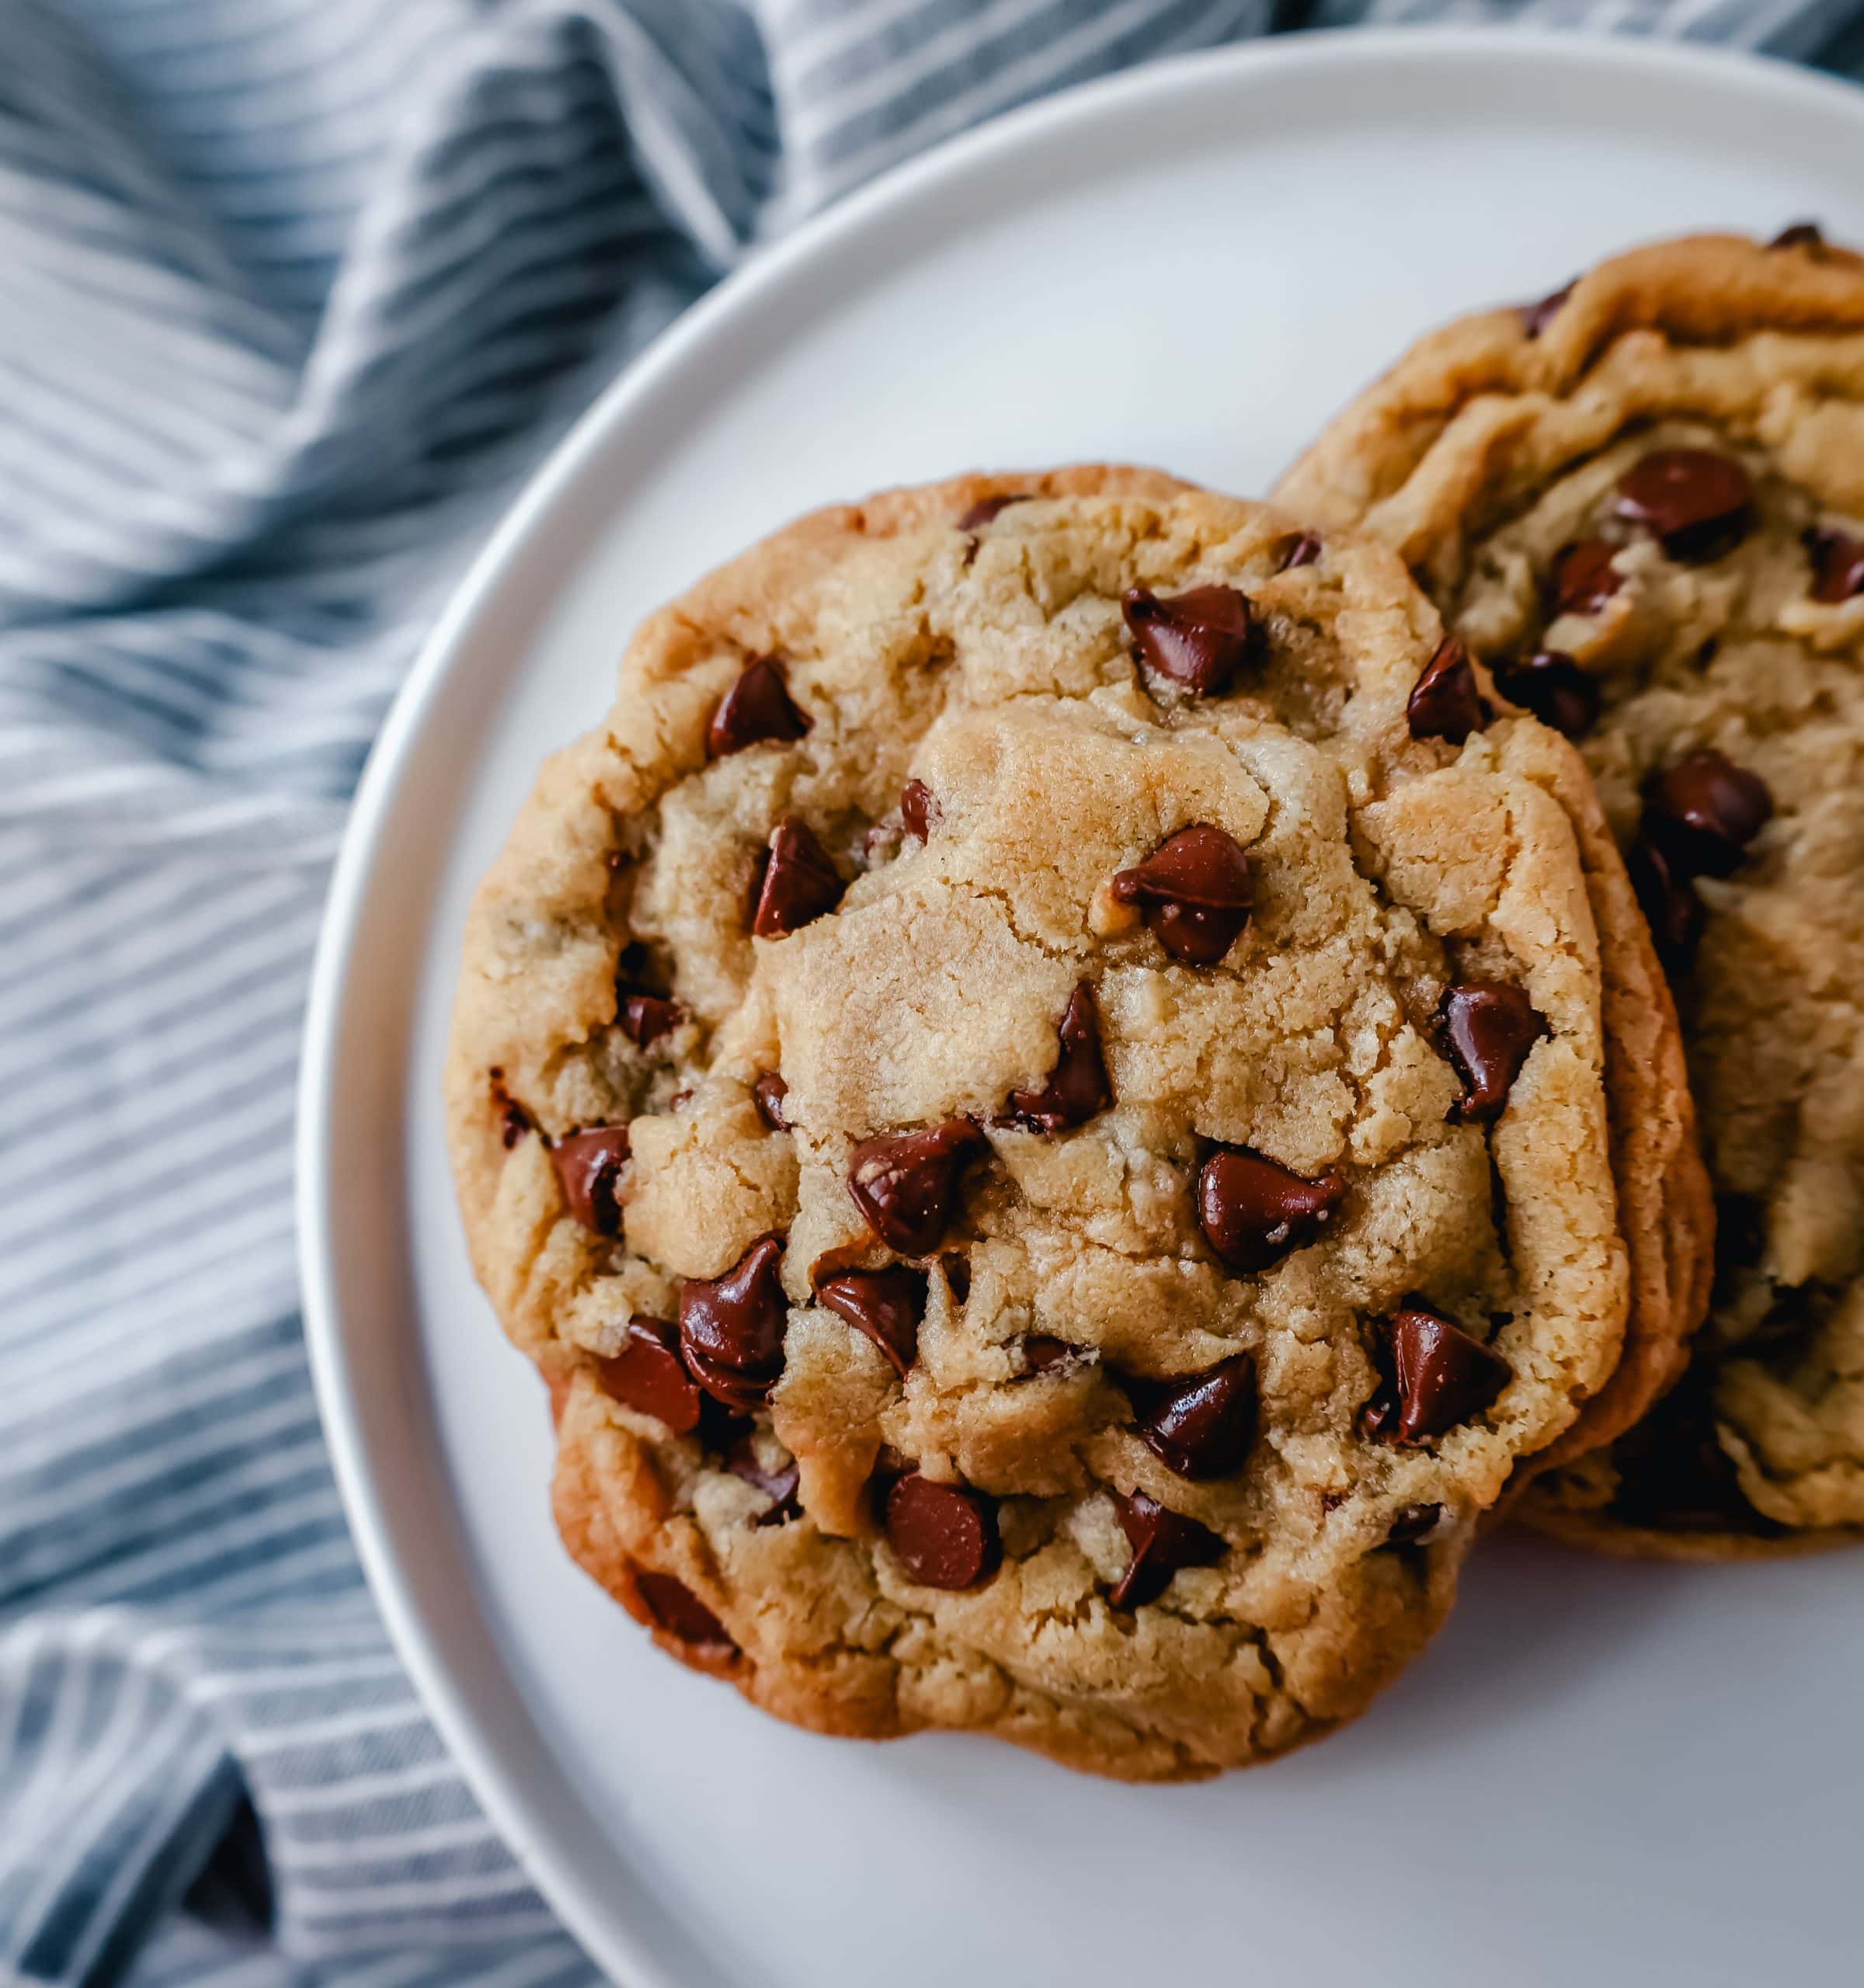 https://www.modernhoney.com/wp-content/uploads/2021/12/Chocolate-Chip-Cookies-for-Two-8-scaled.jpg